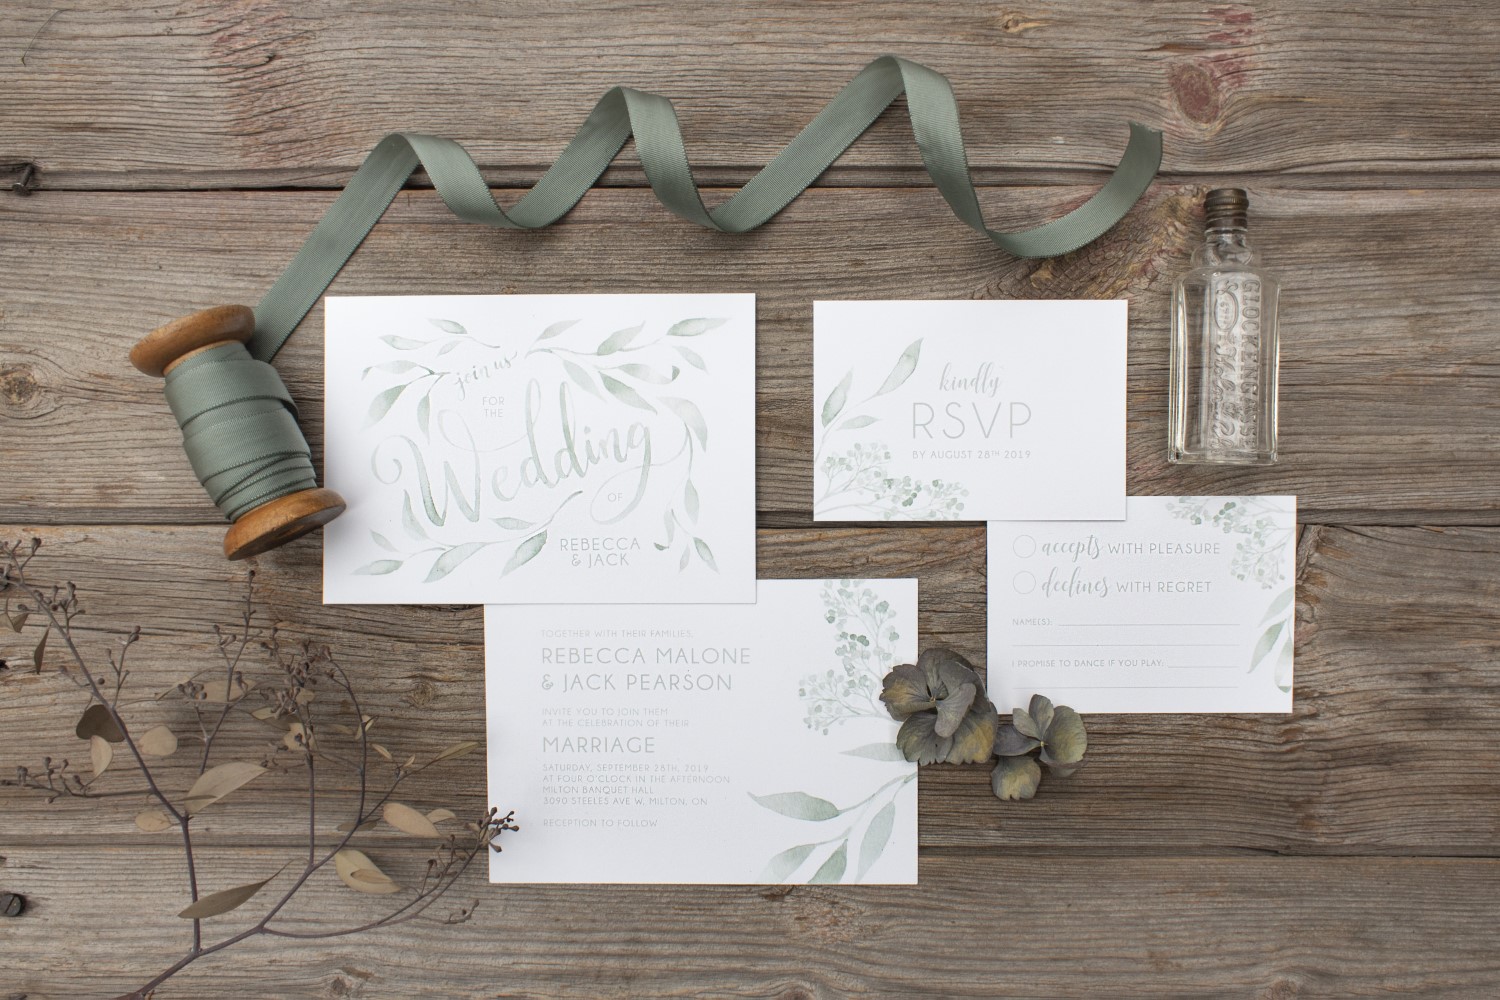 Monochromatic Blush or Teal Watercolour Leaves and Typography Wedding Invitations by Alicia's Infinity - www.aliciasinfinity.com